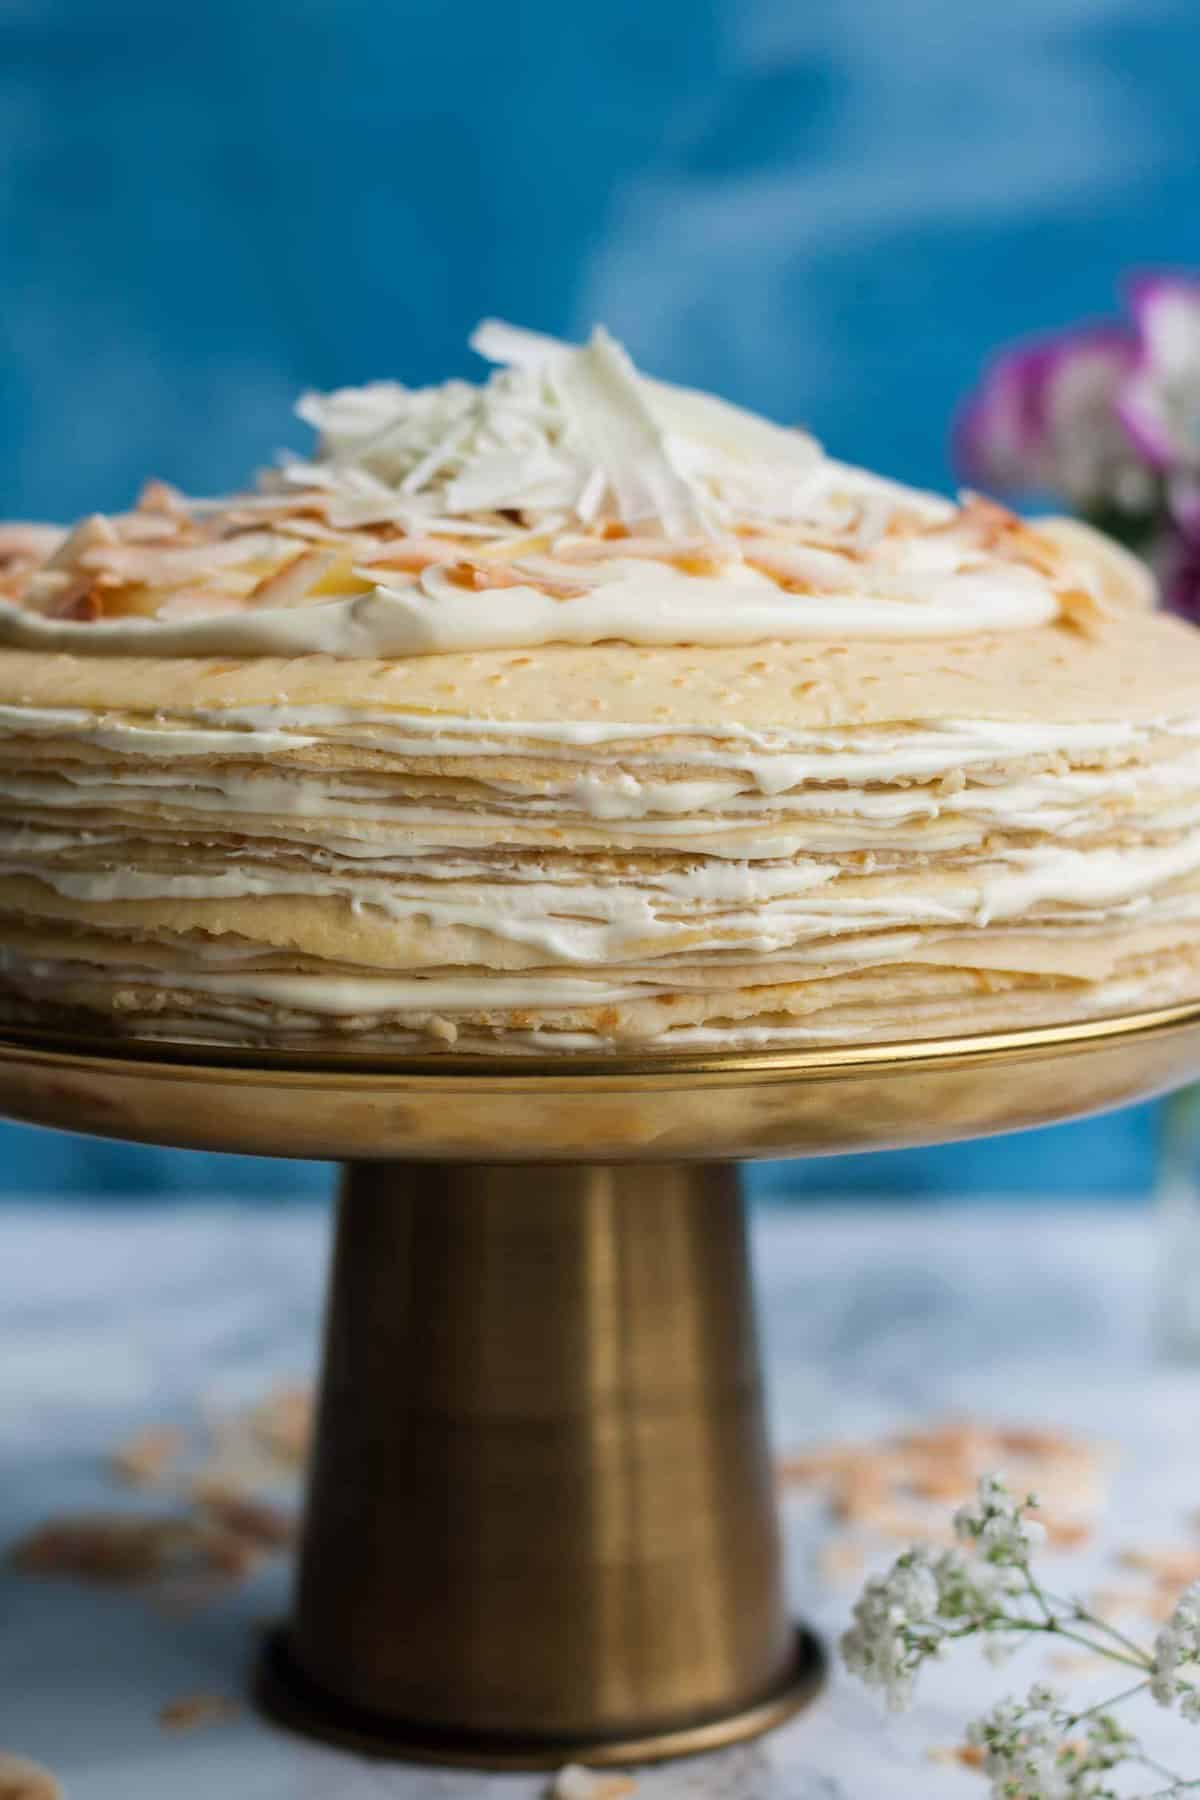 A close up of a crepe cake showing the layers with cream on top.